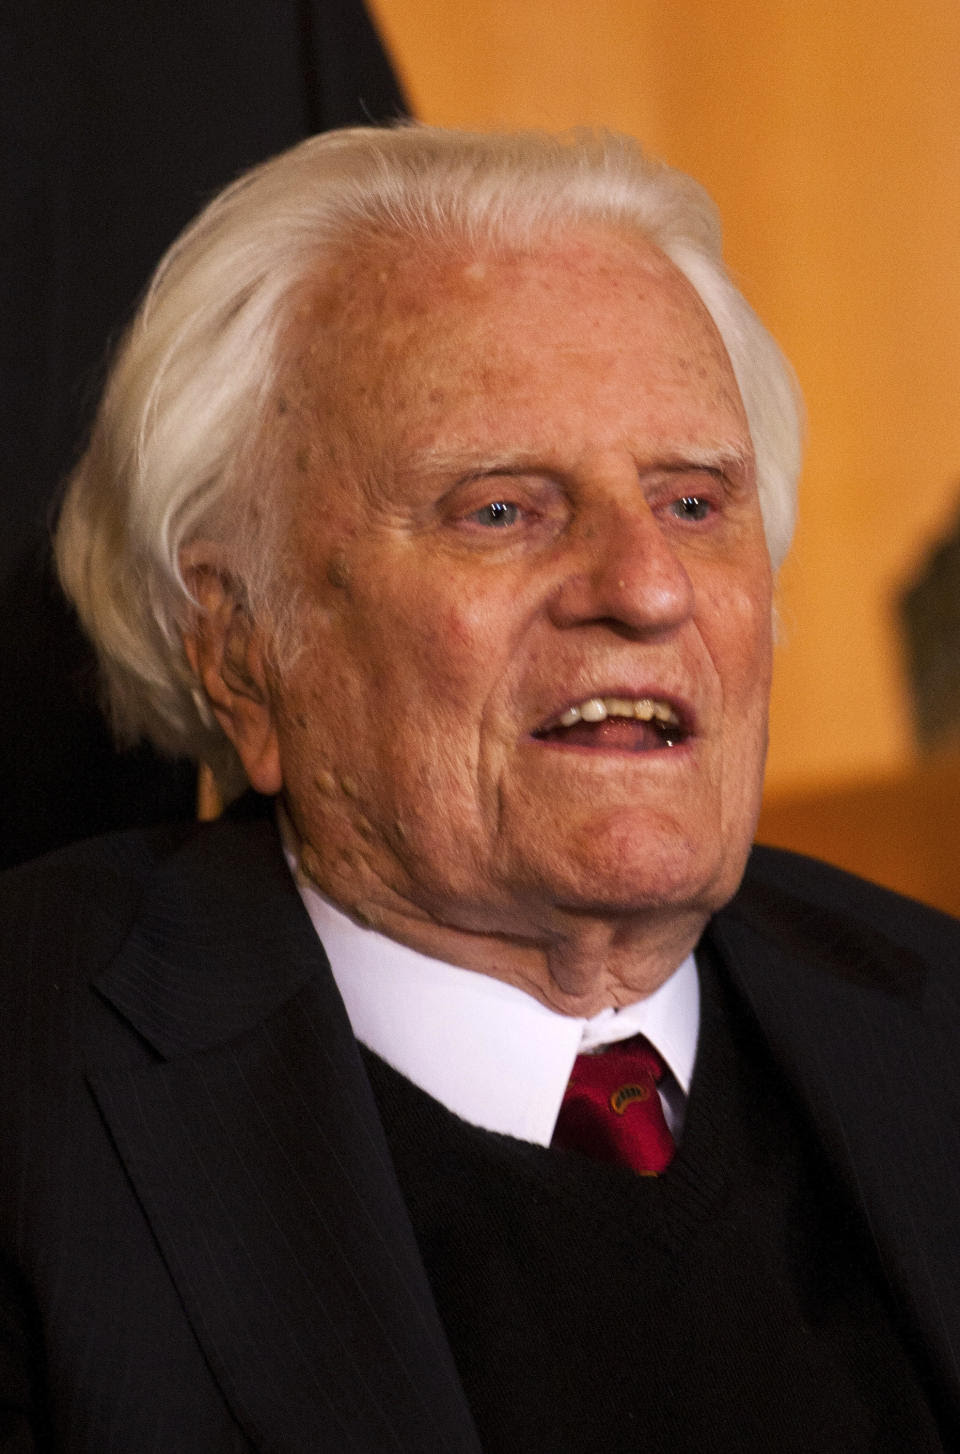 Billy Graham, seen in 2010, has died at the age of 99. (CHRIS KEANE / Reuters)